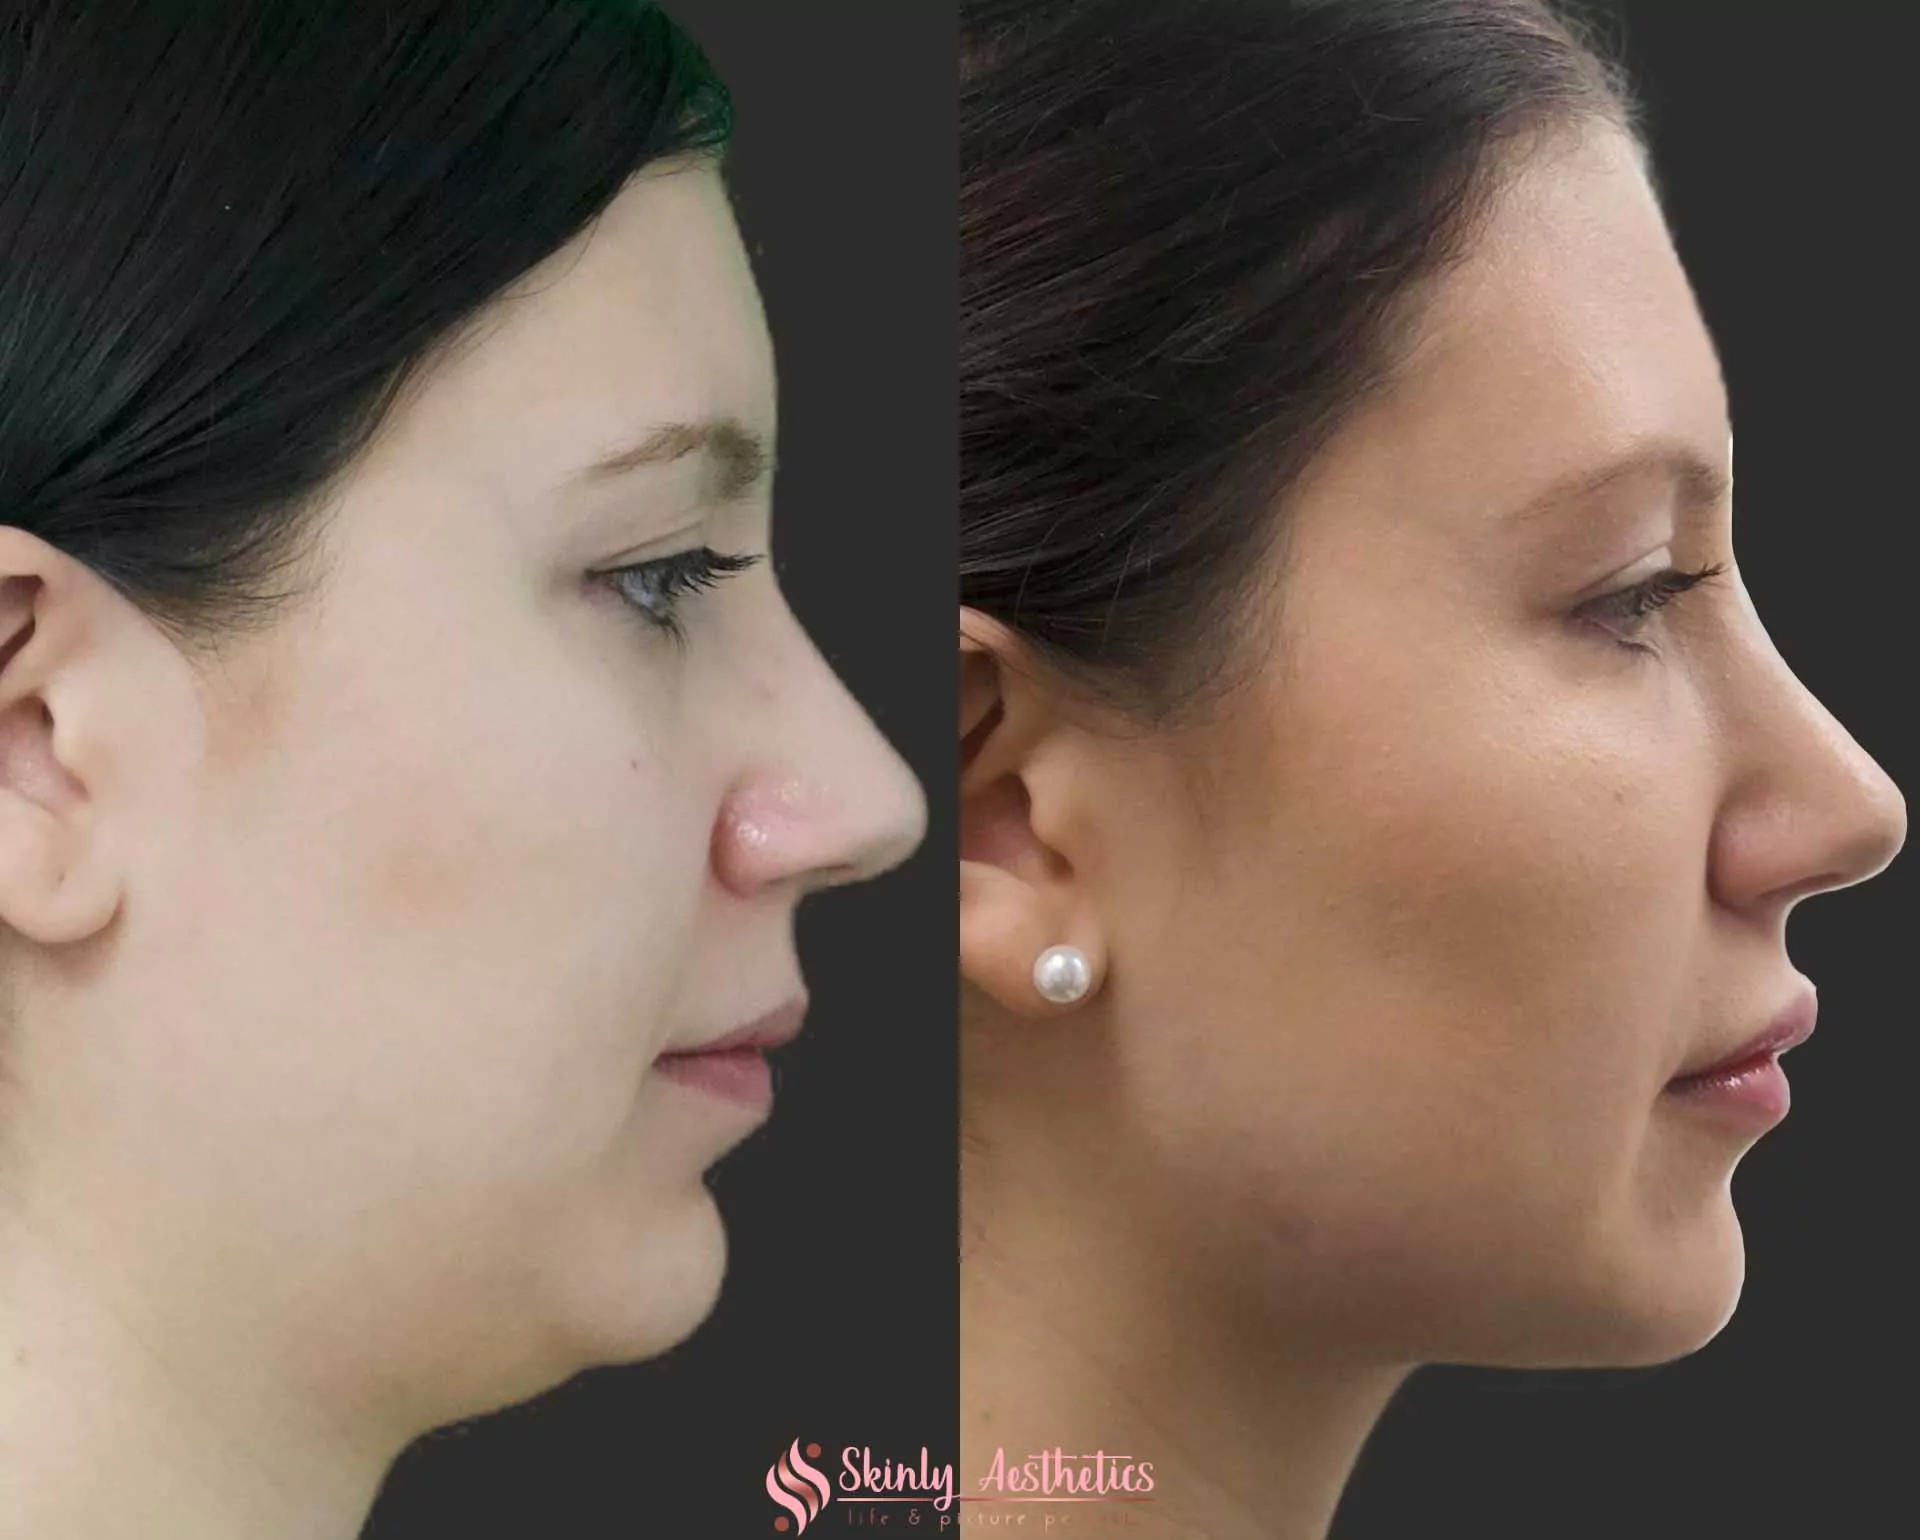 non surgical jawline definition with coolsculpting kybella and juvederm